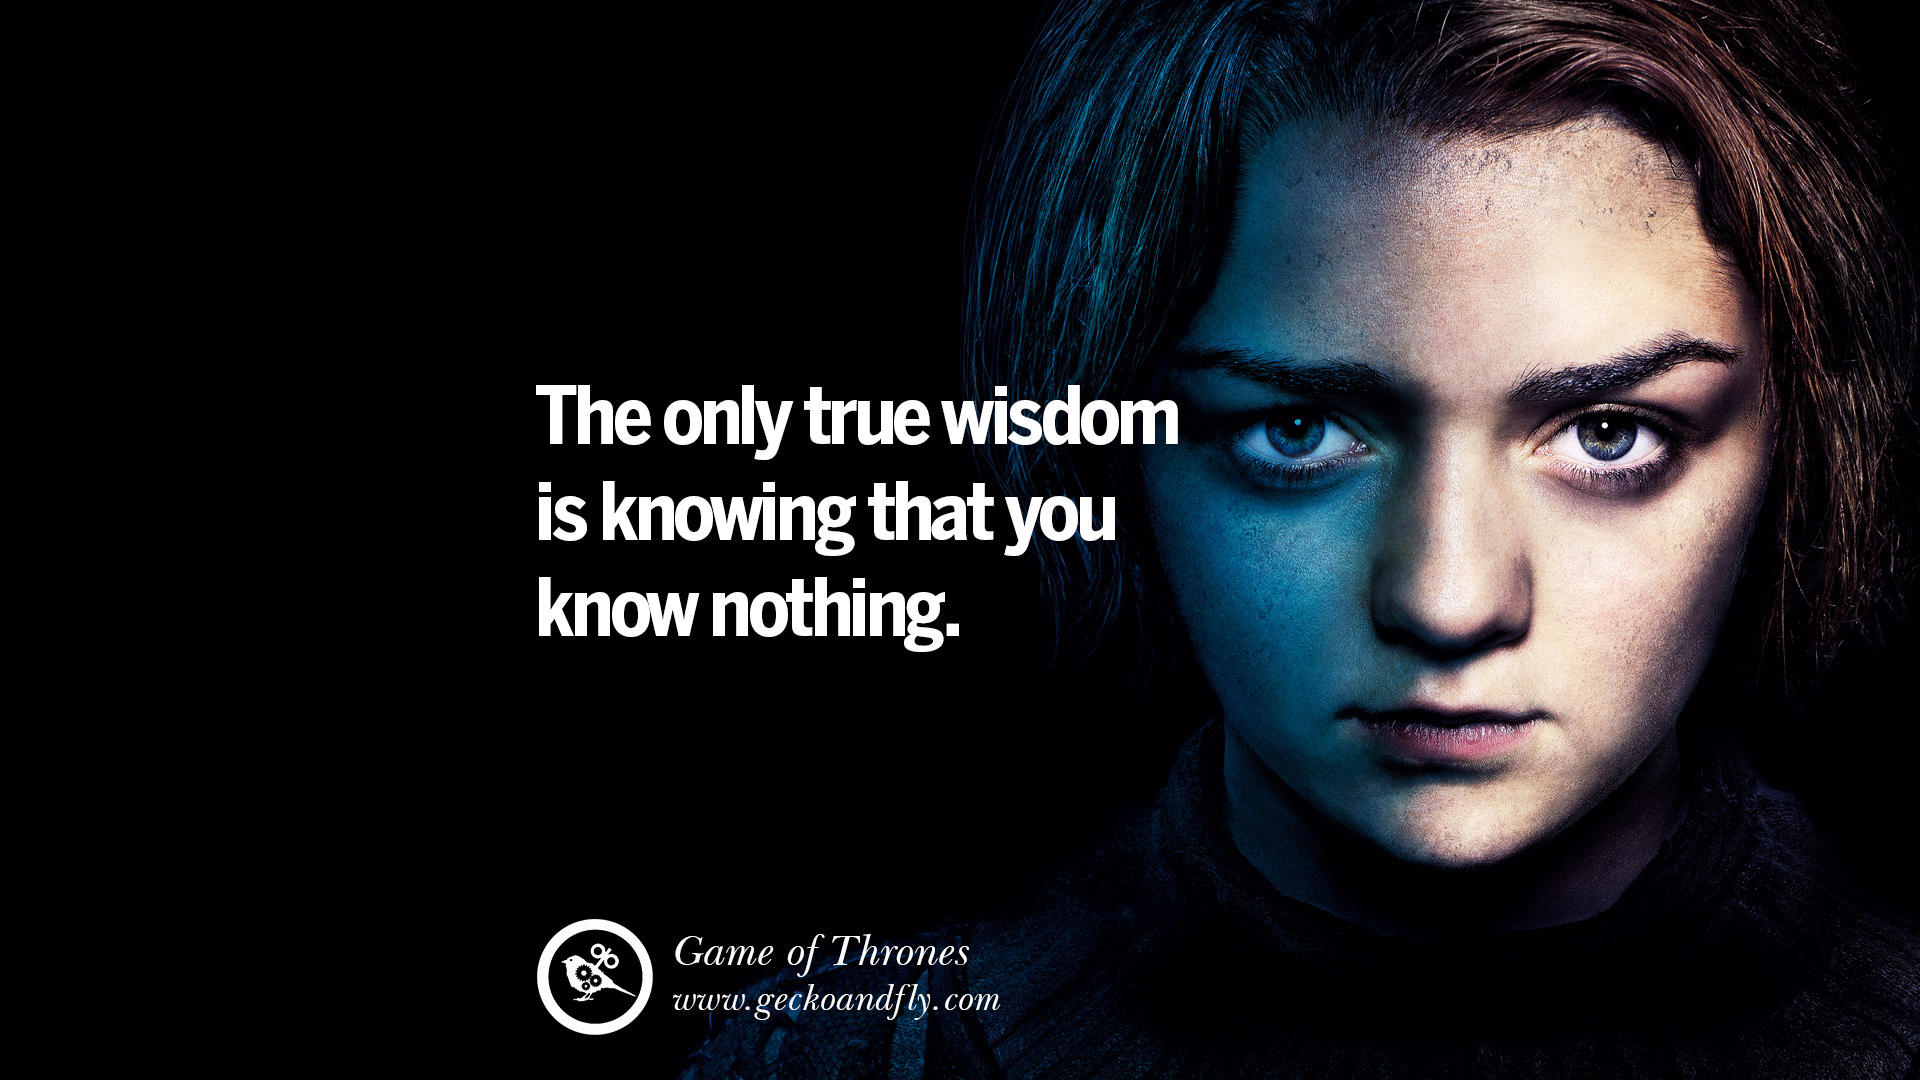 Inspirational Game Of Thrones Quotes Wallpaper